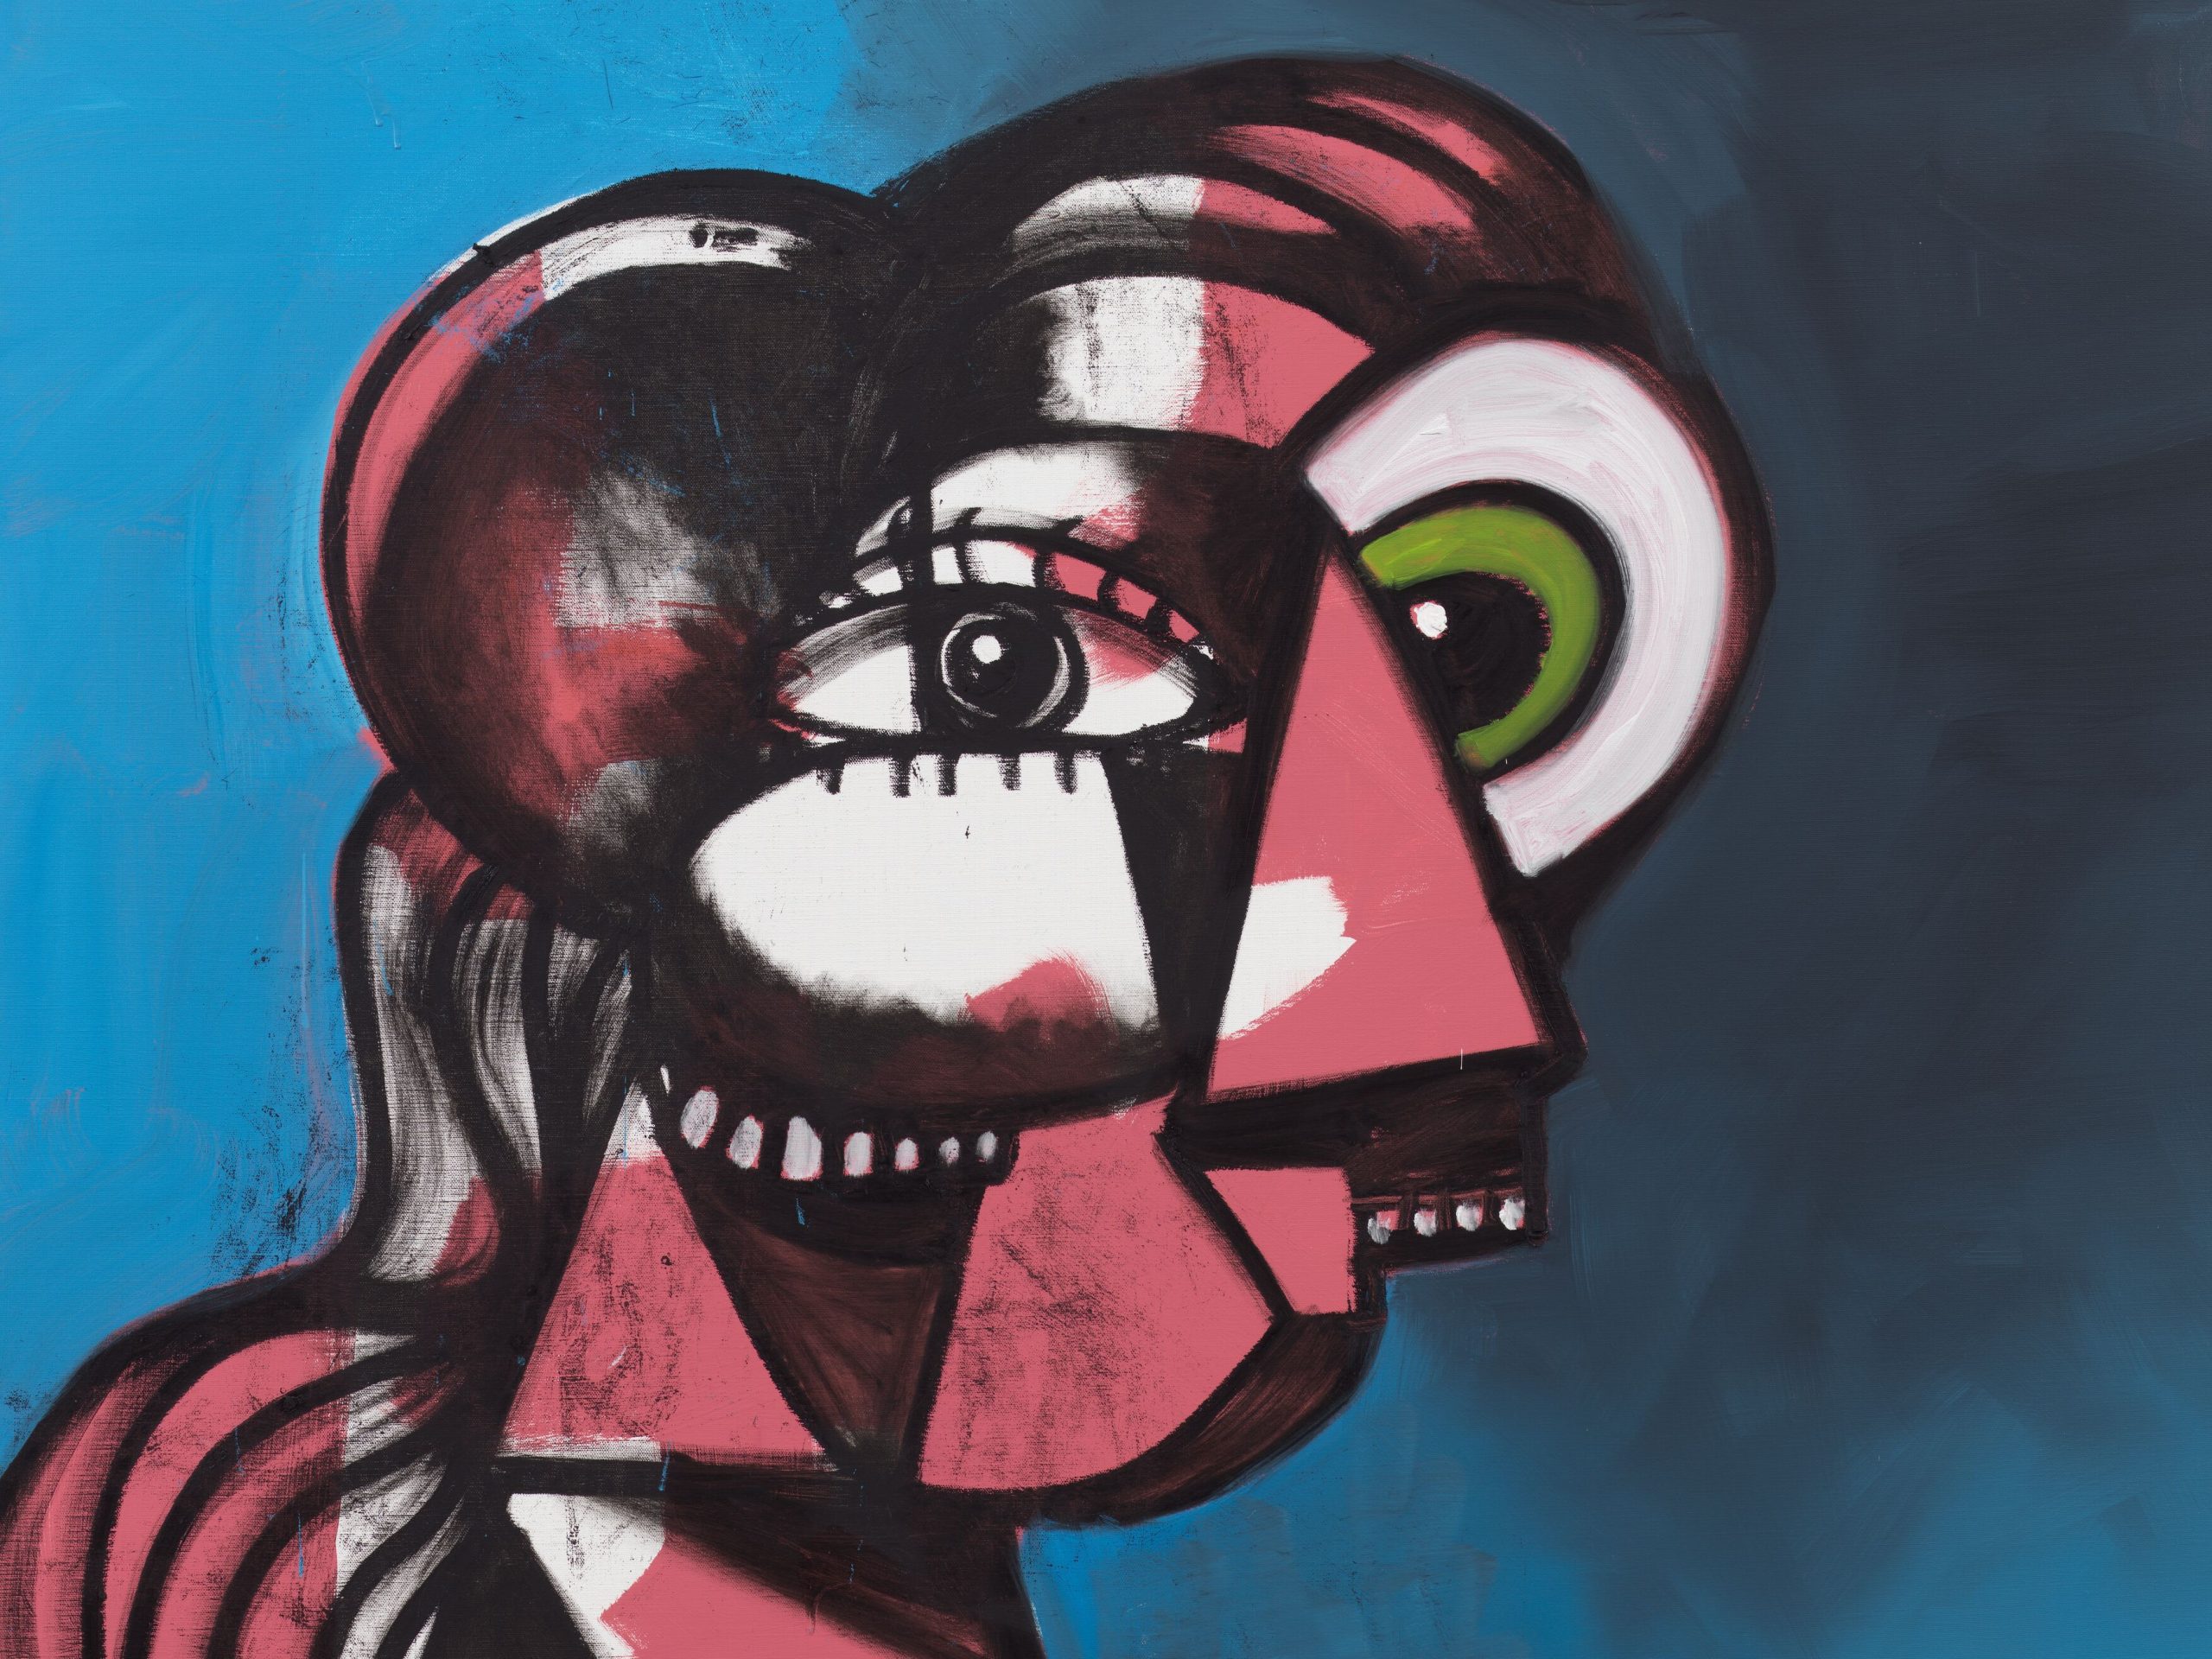 George Condo Pink and White Profile with Green Eye, 2021, Acrylic and oil stick on linen, 228.6 x 190.5 (cm) - 90.0 x 75.0 (in), detail, USD 2,650,000 @ Hauser & Wirth